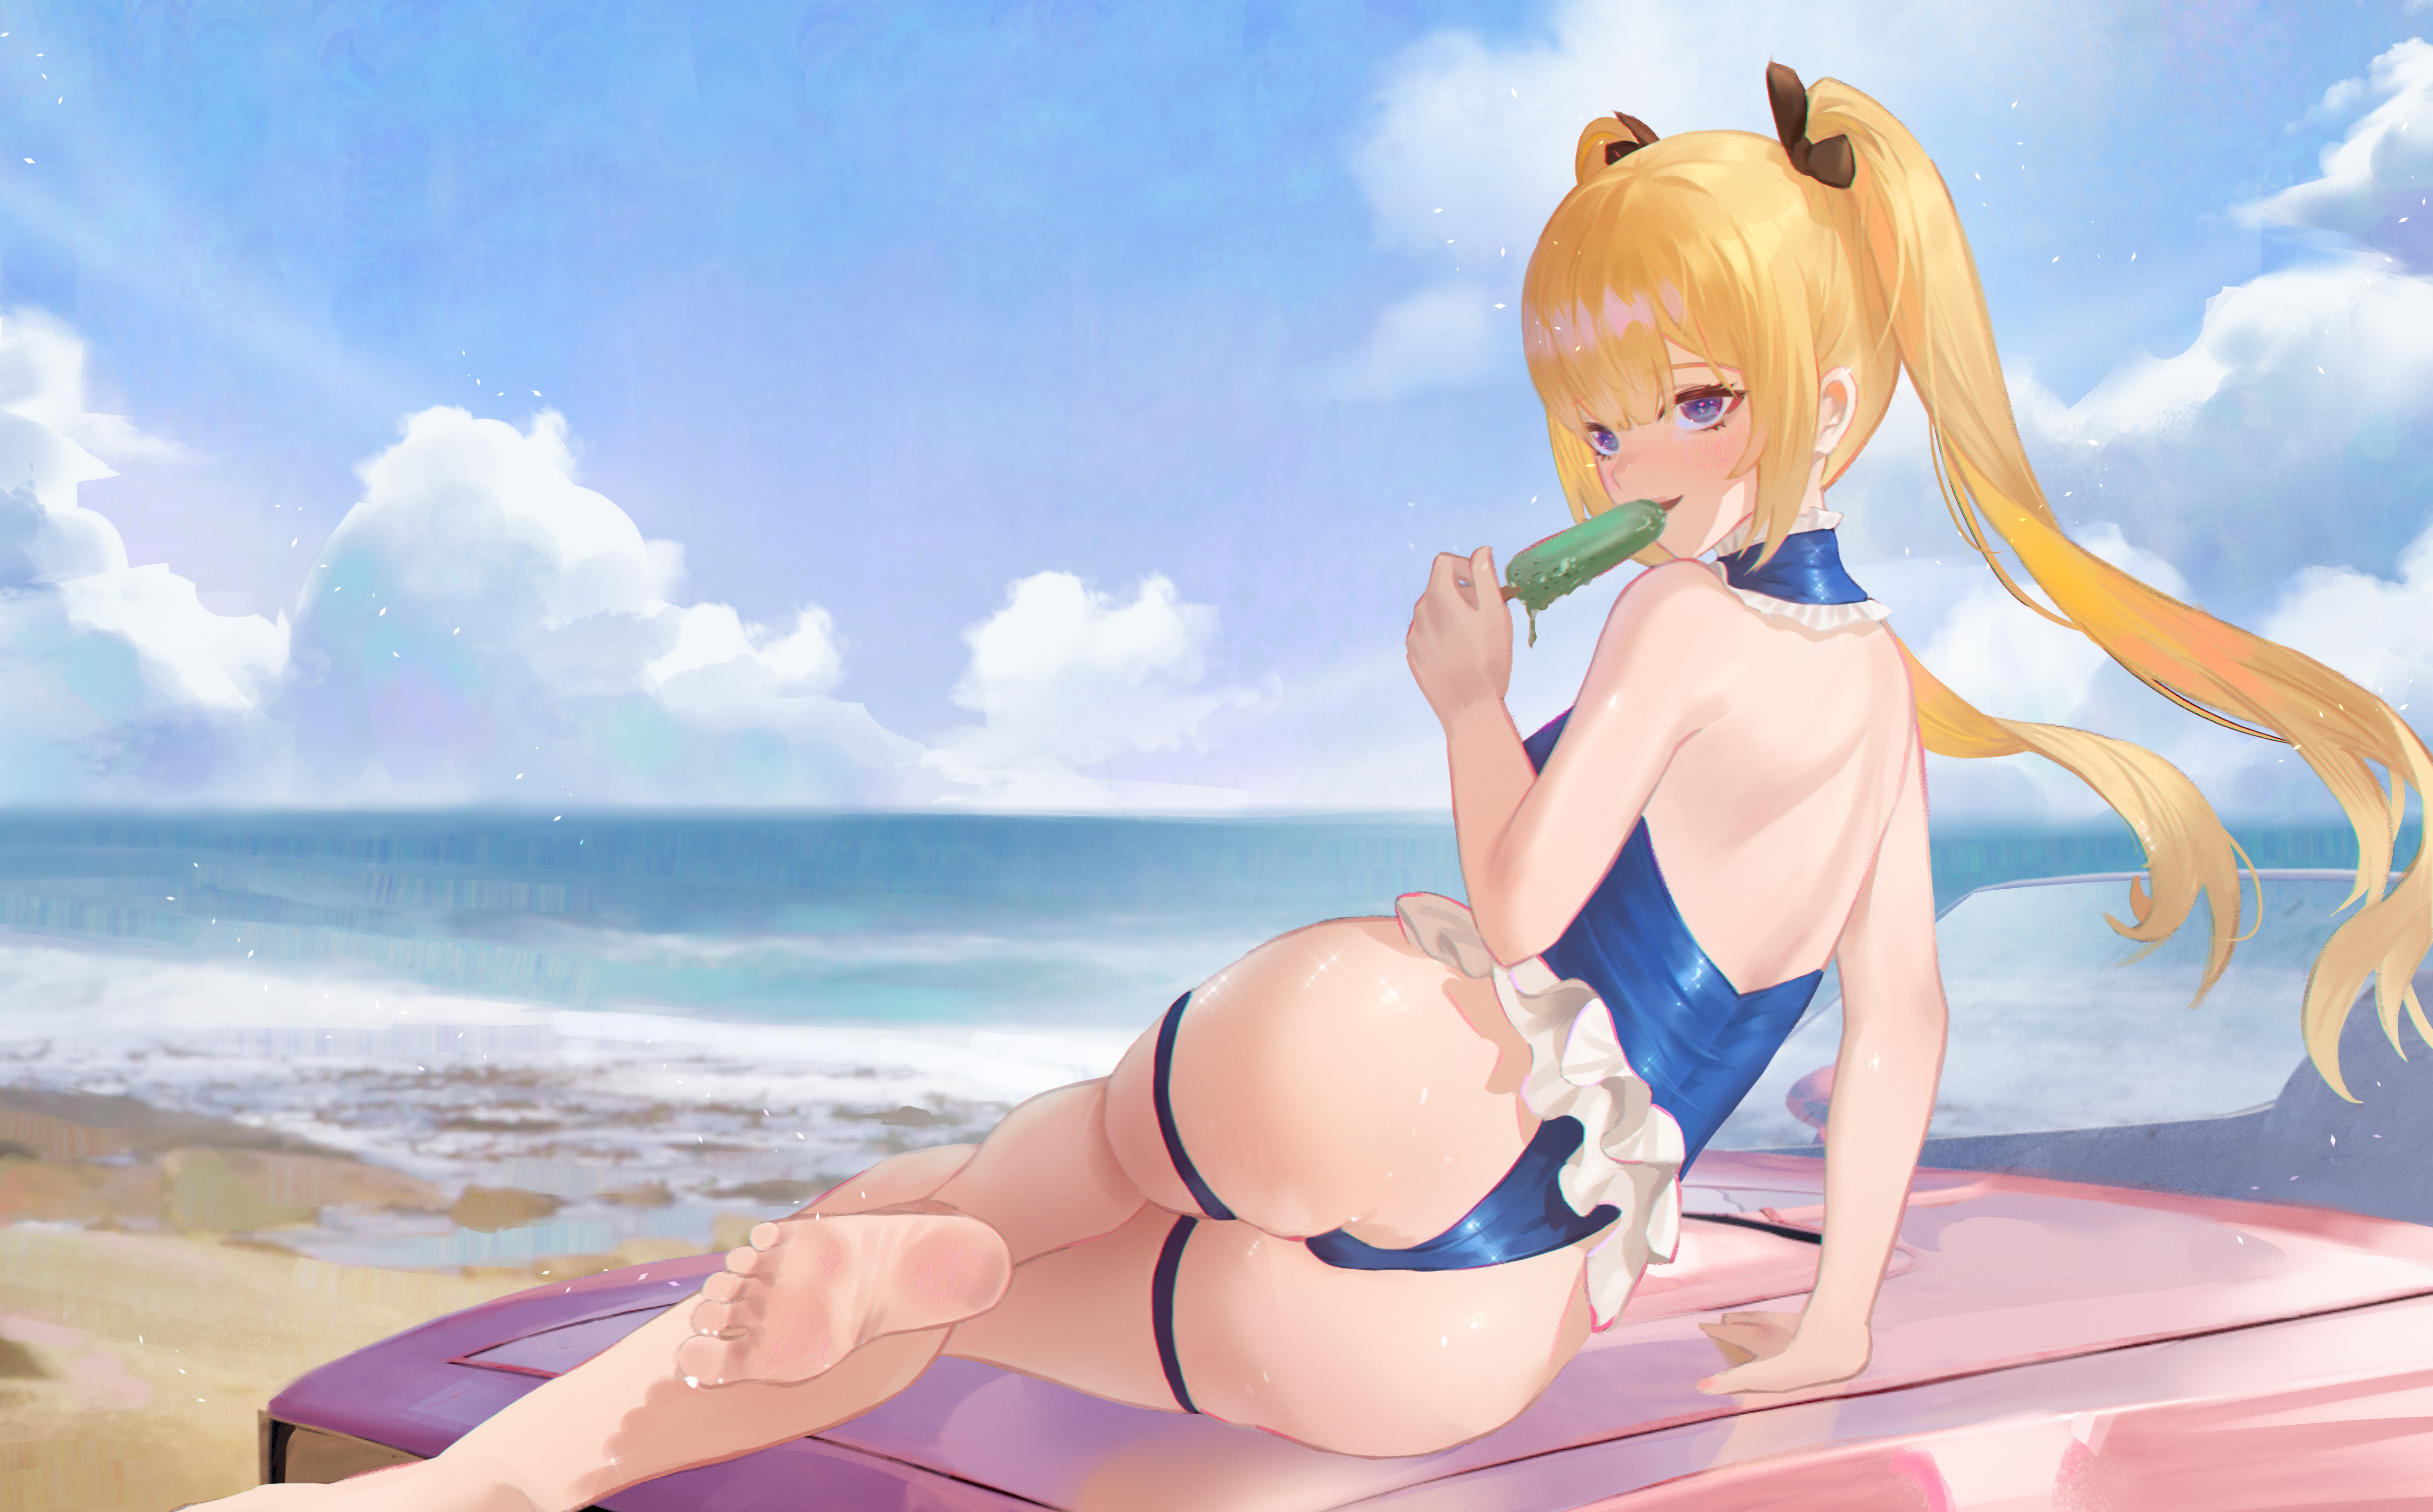 Anime 4656x2894 anime anime girls Cirilla (artist) artwork Dead or Alive beach twintails blue eyes ice cream feet ass one-piece swimsuit Marie Rose (Dead or Alive) rear view women outdoors women on beach barefoot blonde video games video game characters video game warriors blue swimsuit food sweets popsicle sky horizon clouds